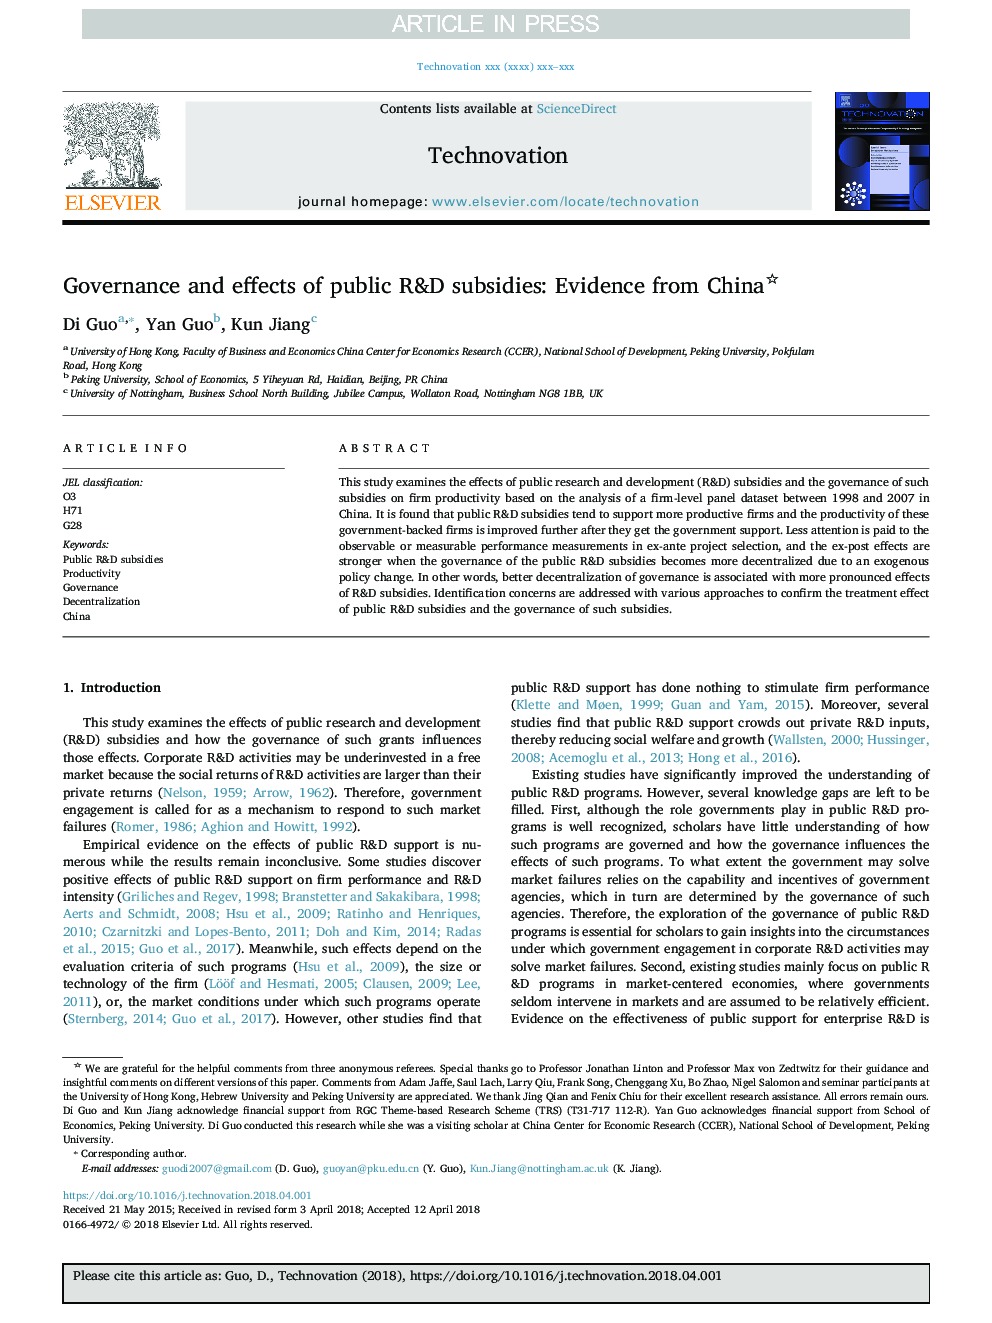 Governance and effects of public R&D subsidies: Evidence from China